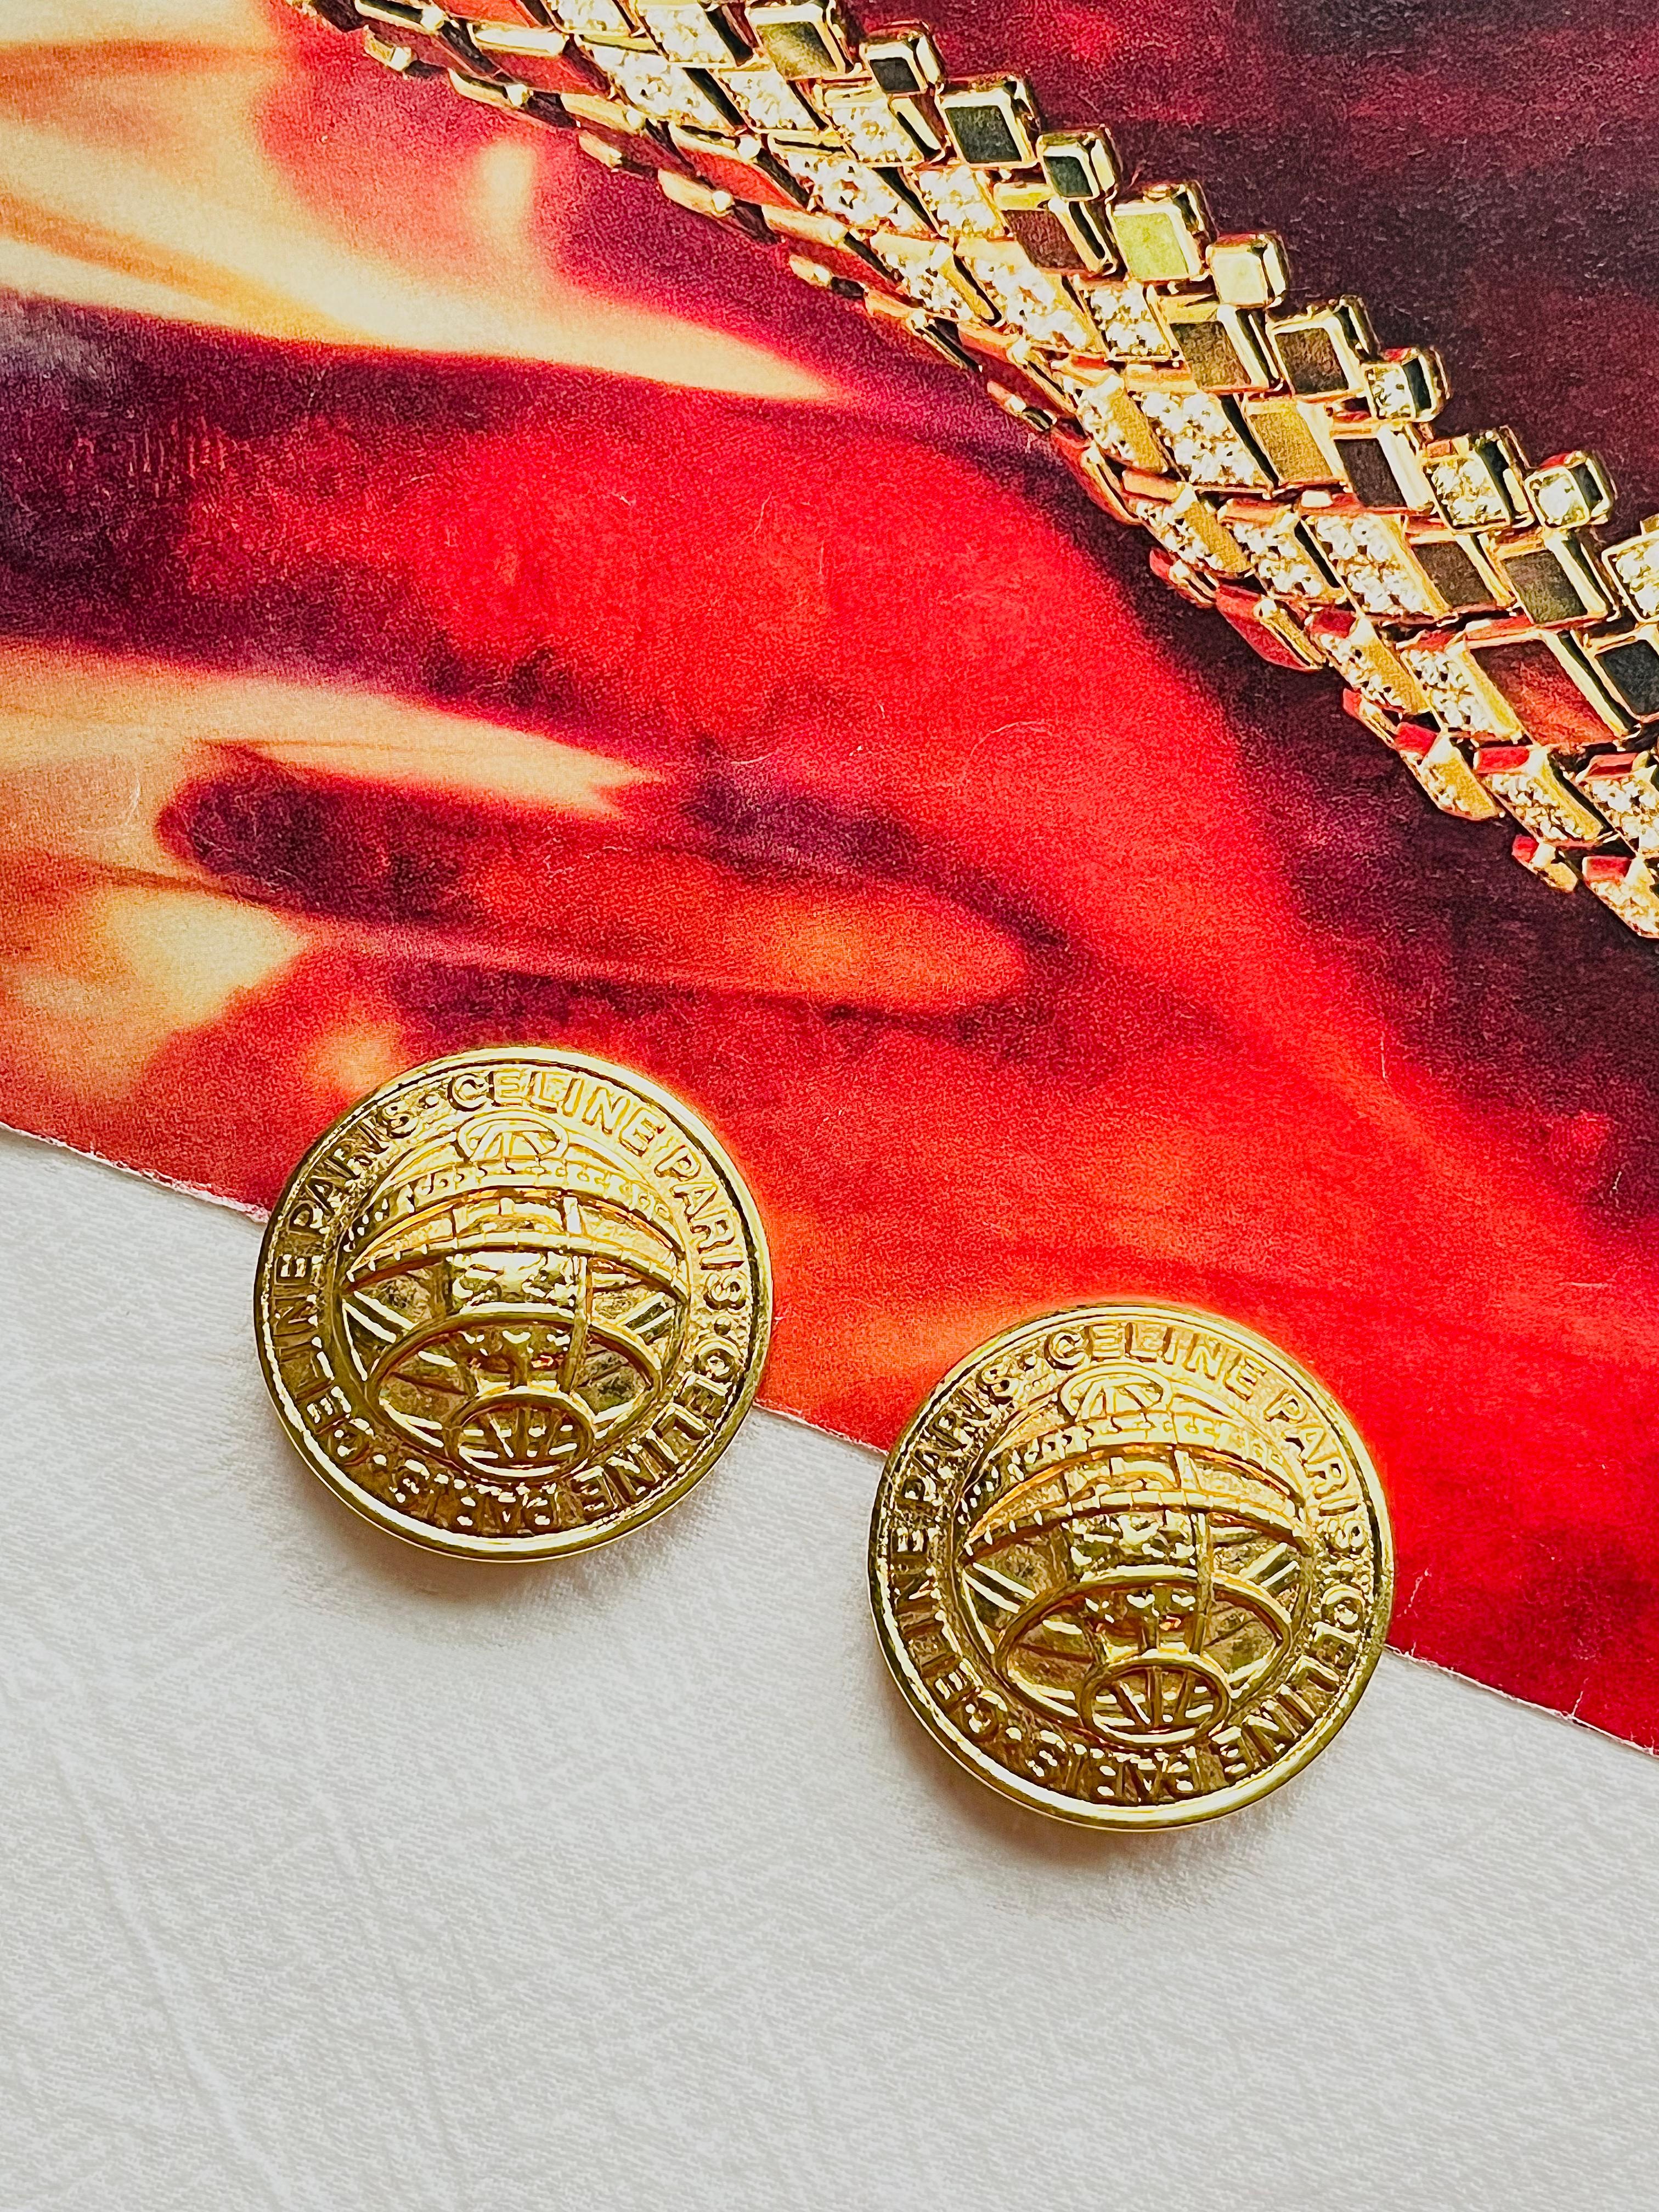 Celine 1992 Vintage Iconic Logo Medallion Circle Earth Globe Gold Clip Earrings In Good Condition For Sale In Wokingham, England